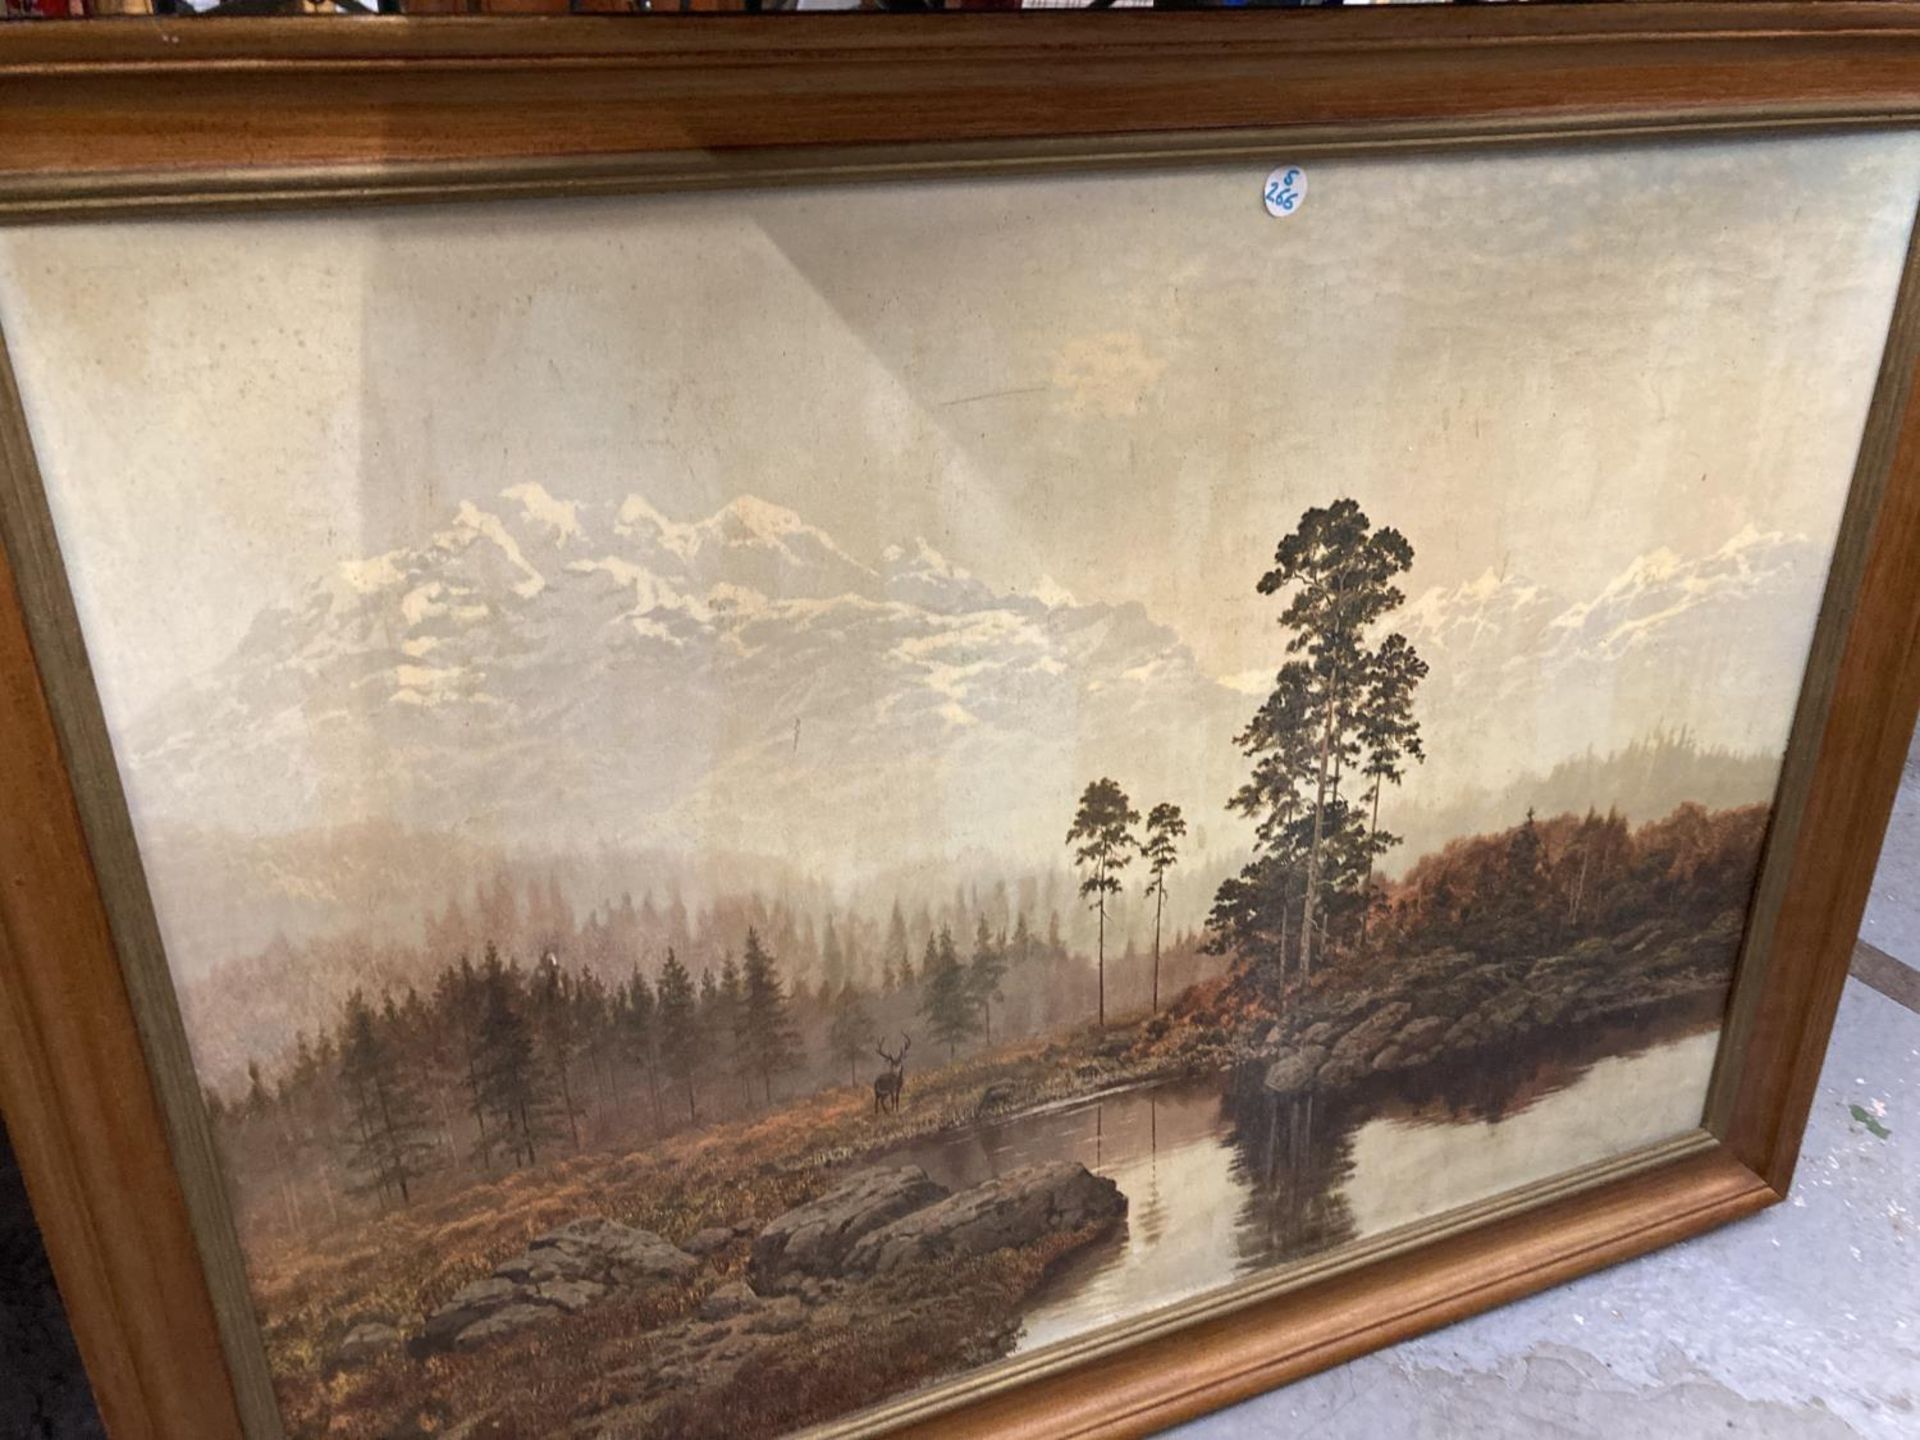 A FRAMED PRINT DEPICTING A LAKE SCENE WITH A STAG AND MOUNTAINOUS BACK DROP - Image 2 of 4